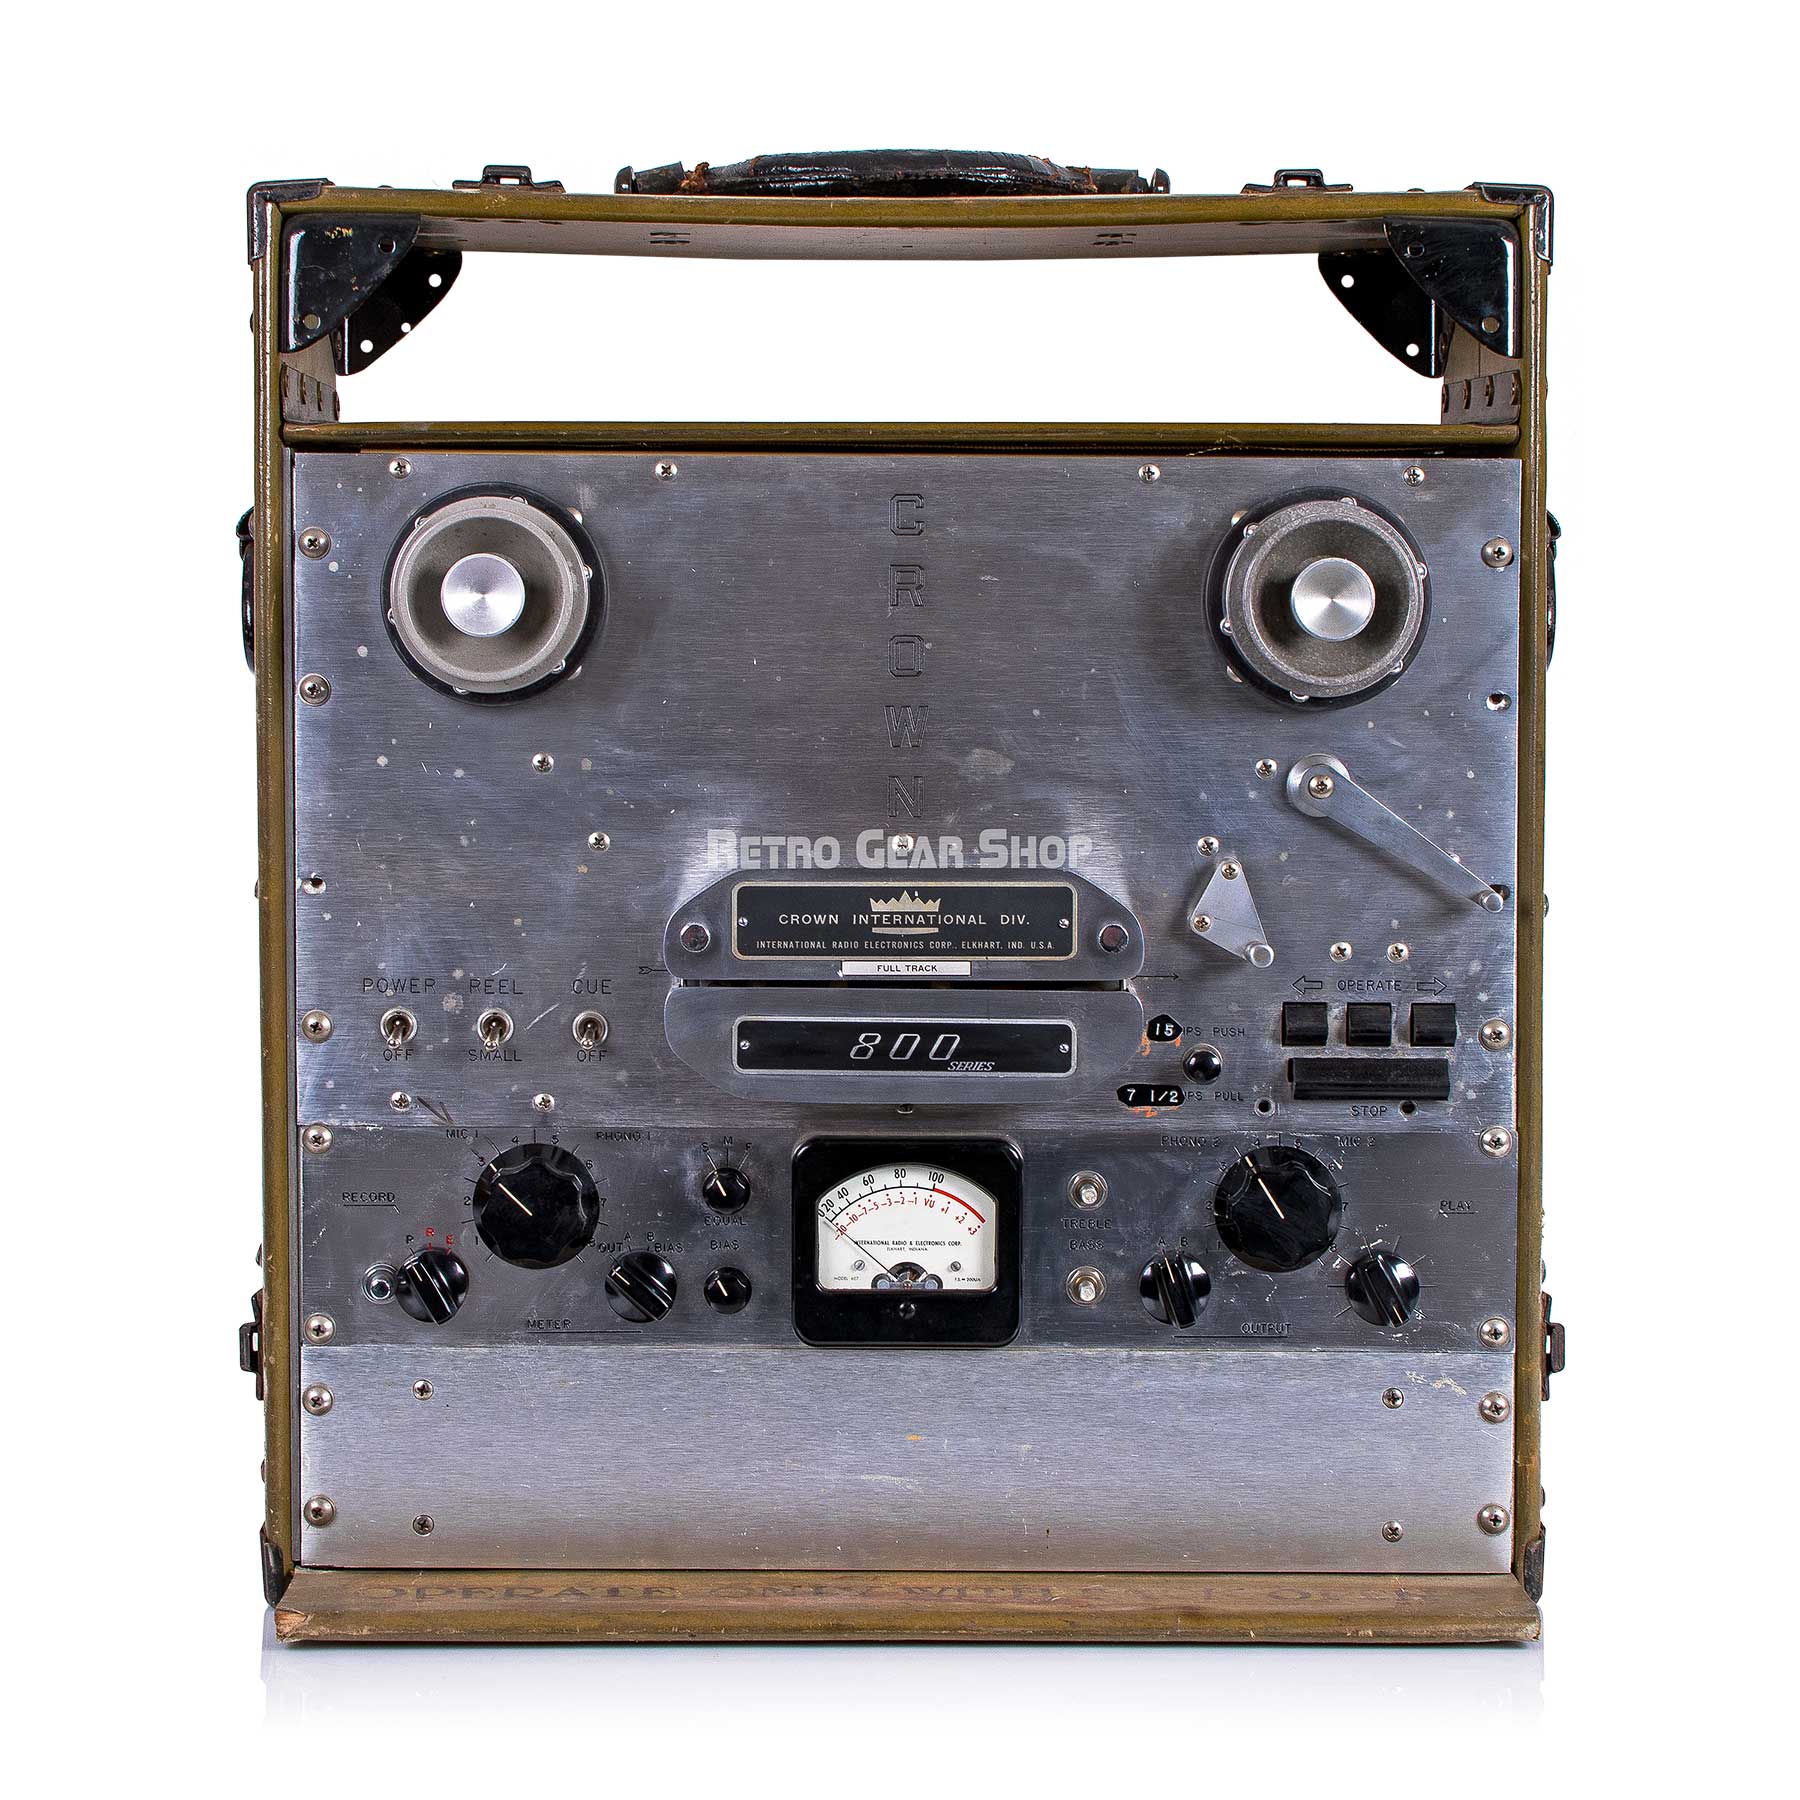 BANNED From ! 2 - Westinghouse 3-inch Reel Tape Recorder